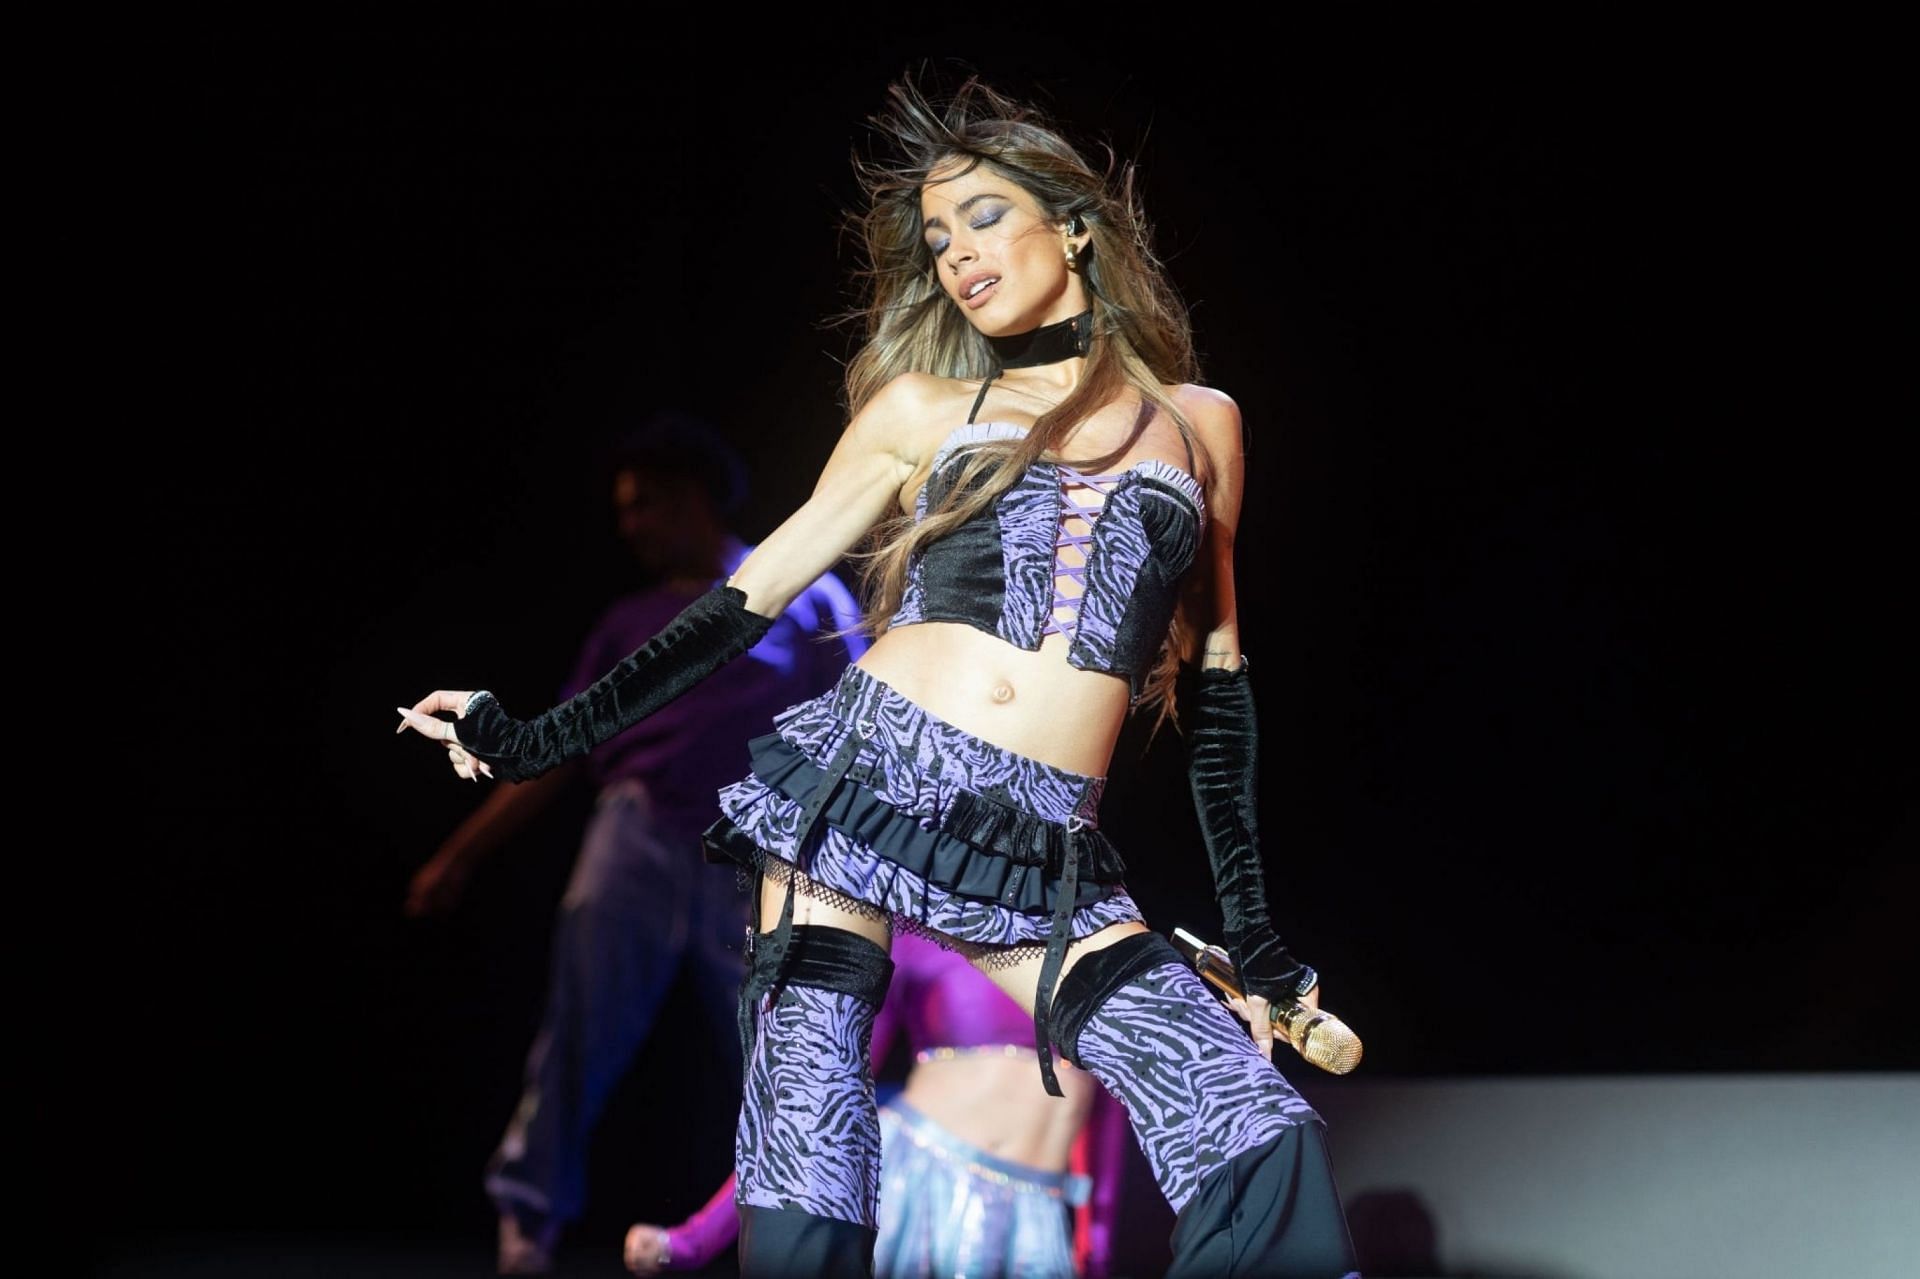 Argentine singer Tini Stoessel performs on stage during a concert at Estadio Centenario on October 7, 2022 in Montevideo, Uruguay(Image via Getty Images)